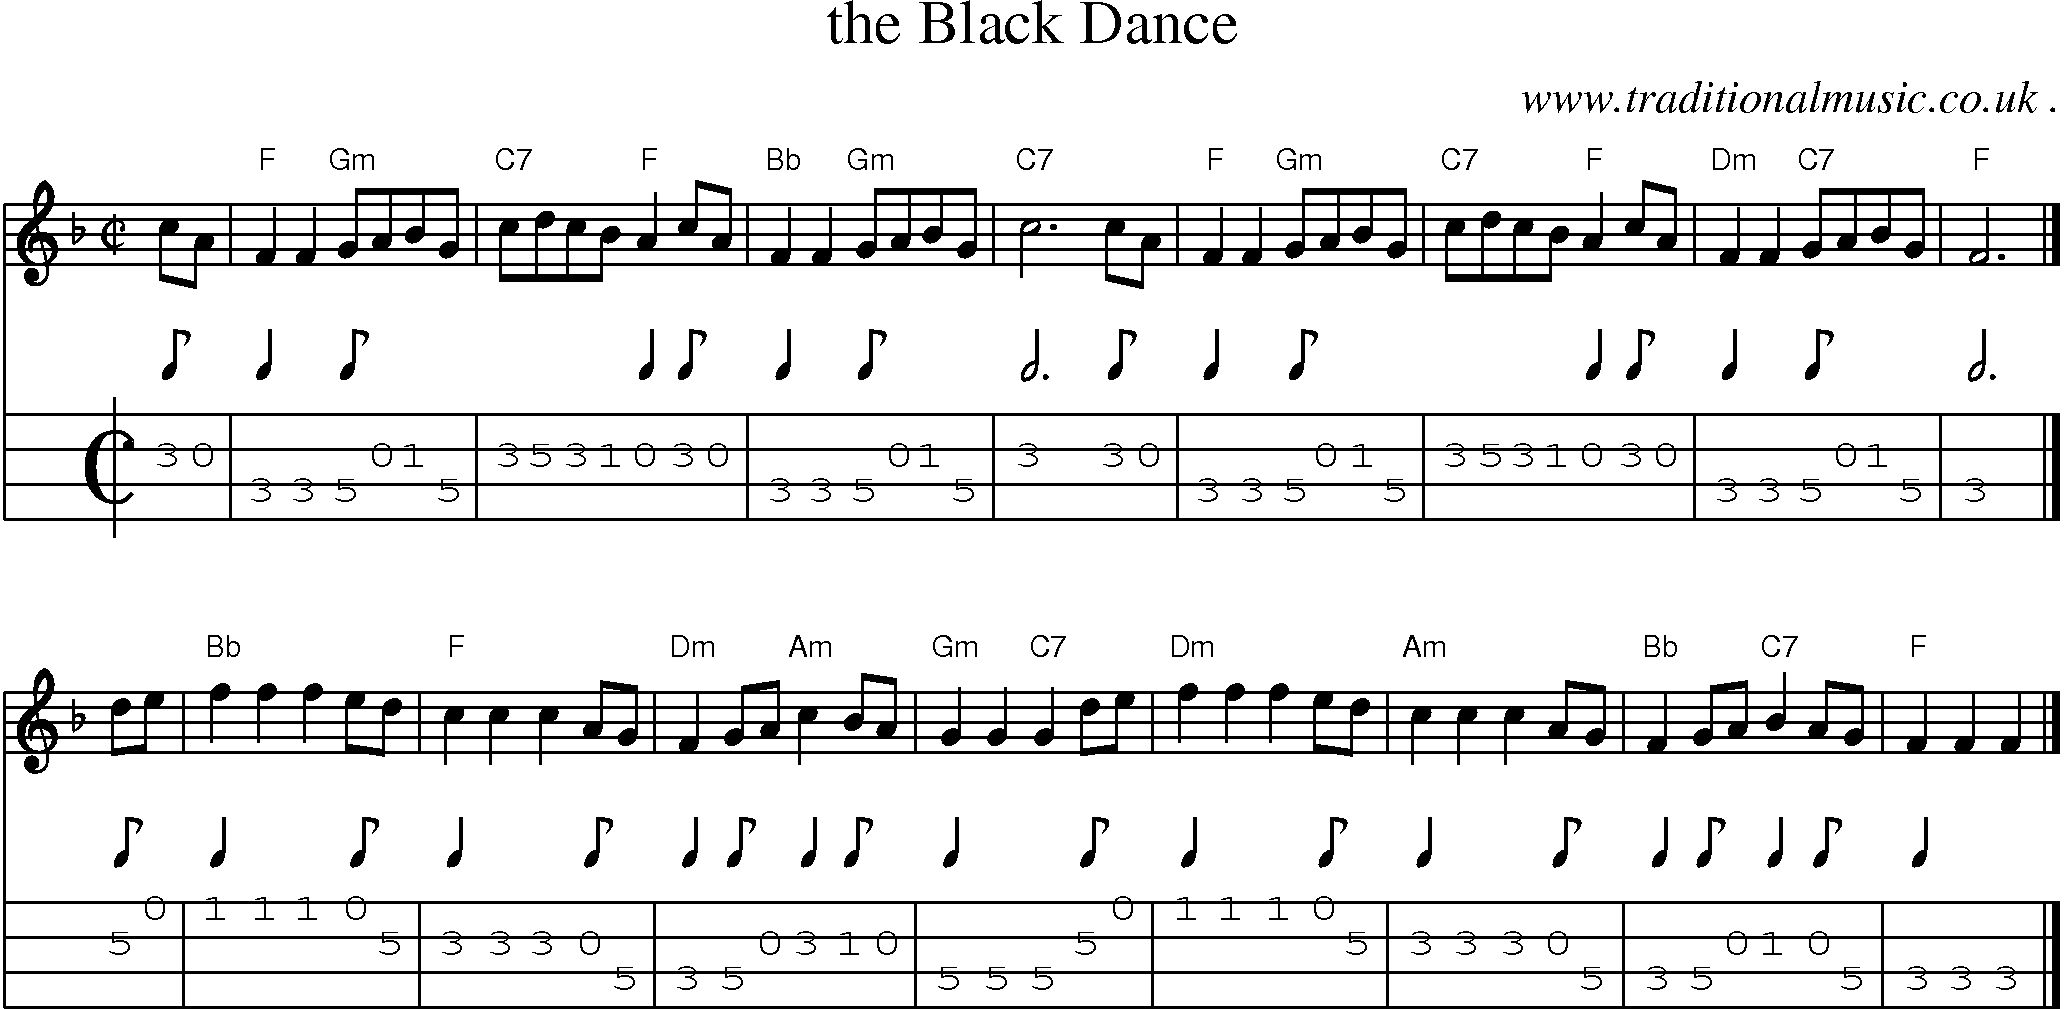 Sheet-music  score, Chords and Mandolin Tabs for The Black Dance